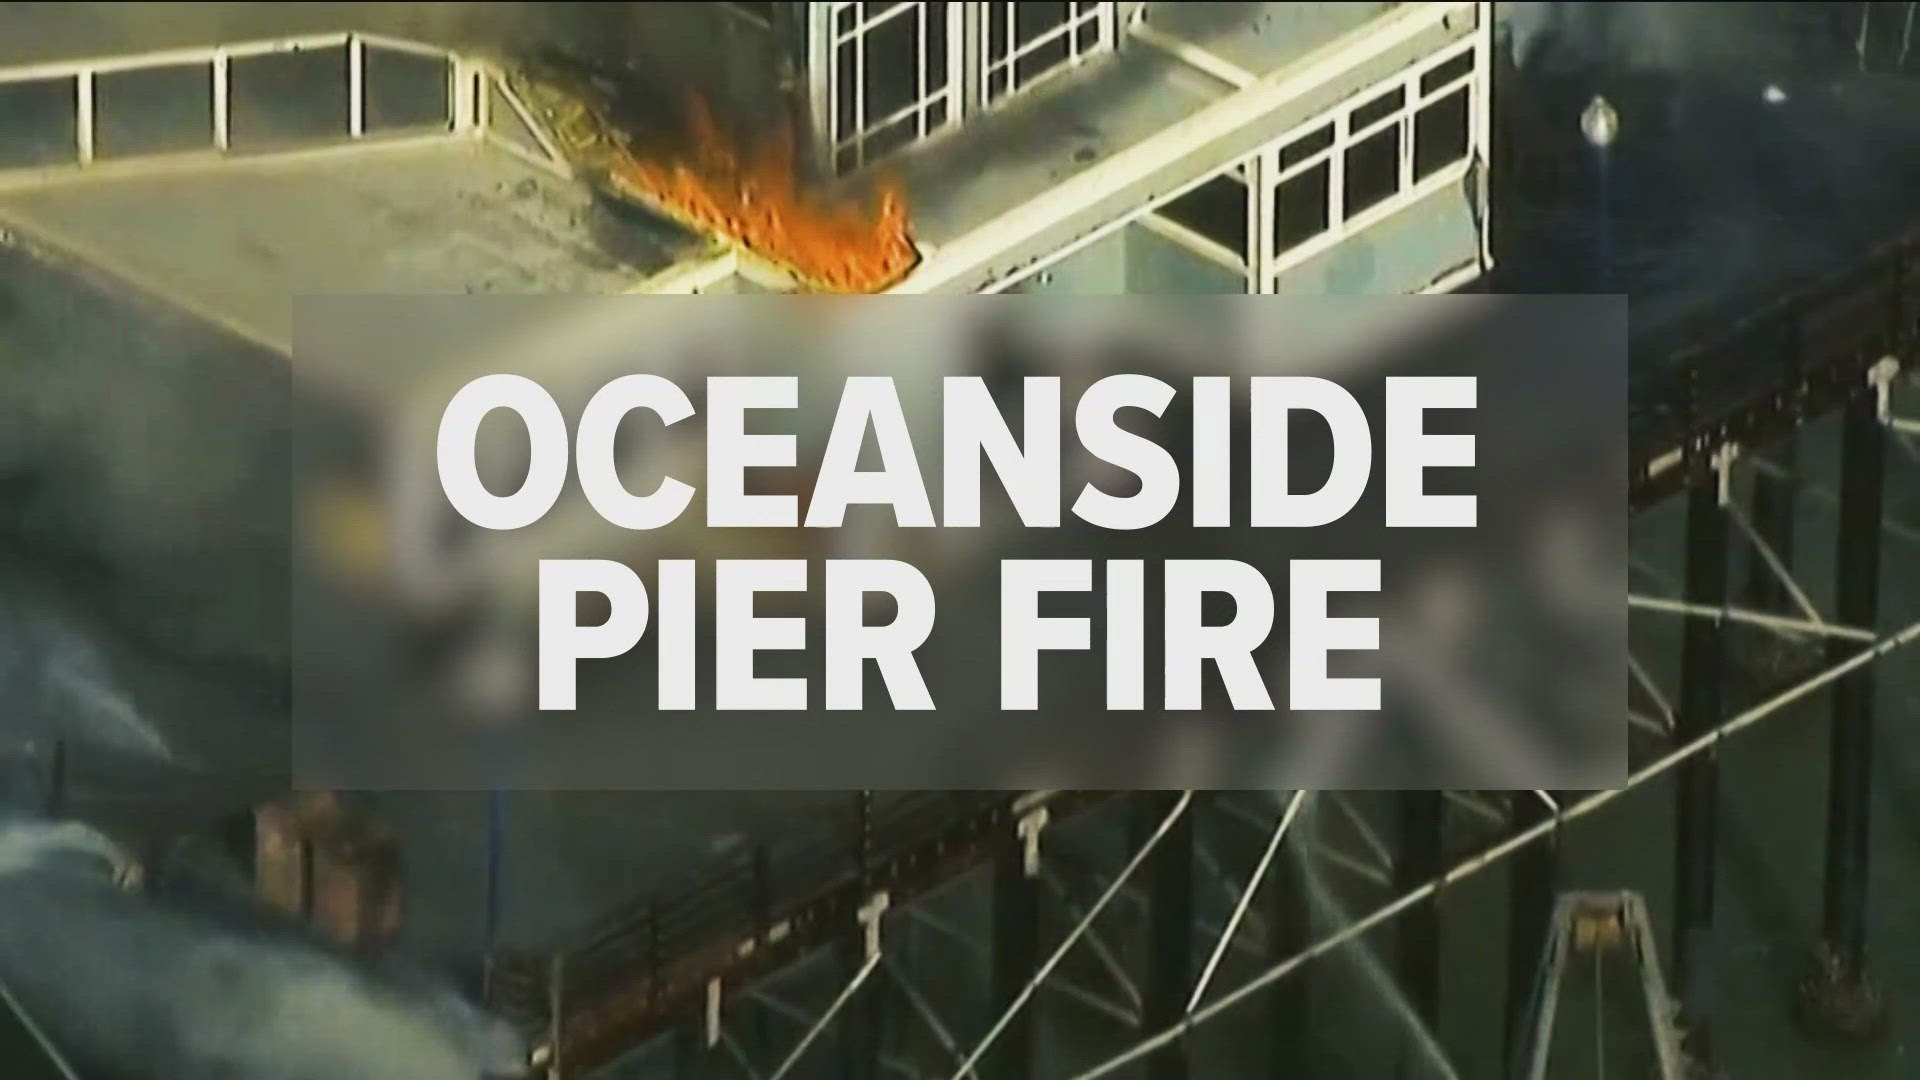 As of 6:30 a.m. Friday, Oceanside Fire officials said the fire had been contained to the end of the pier.